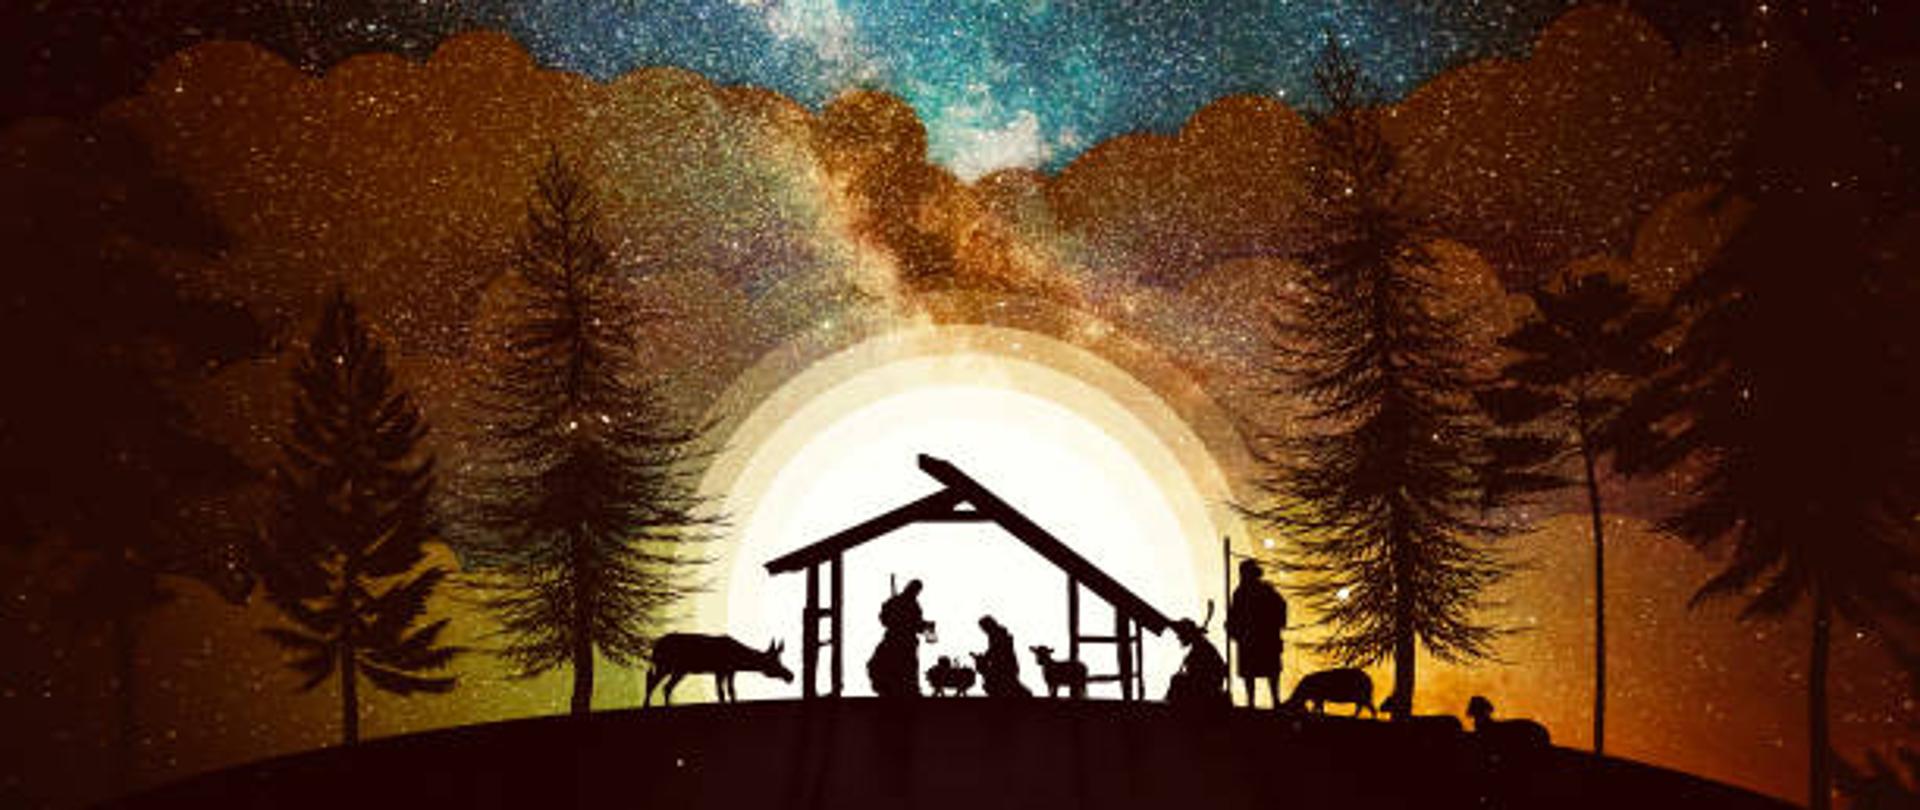 Christmas Scene animation with twinkling stars and nativity characters. Nativity Christmas story under starry sky and moving wispy clouds on golden.